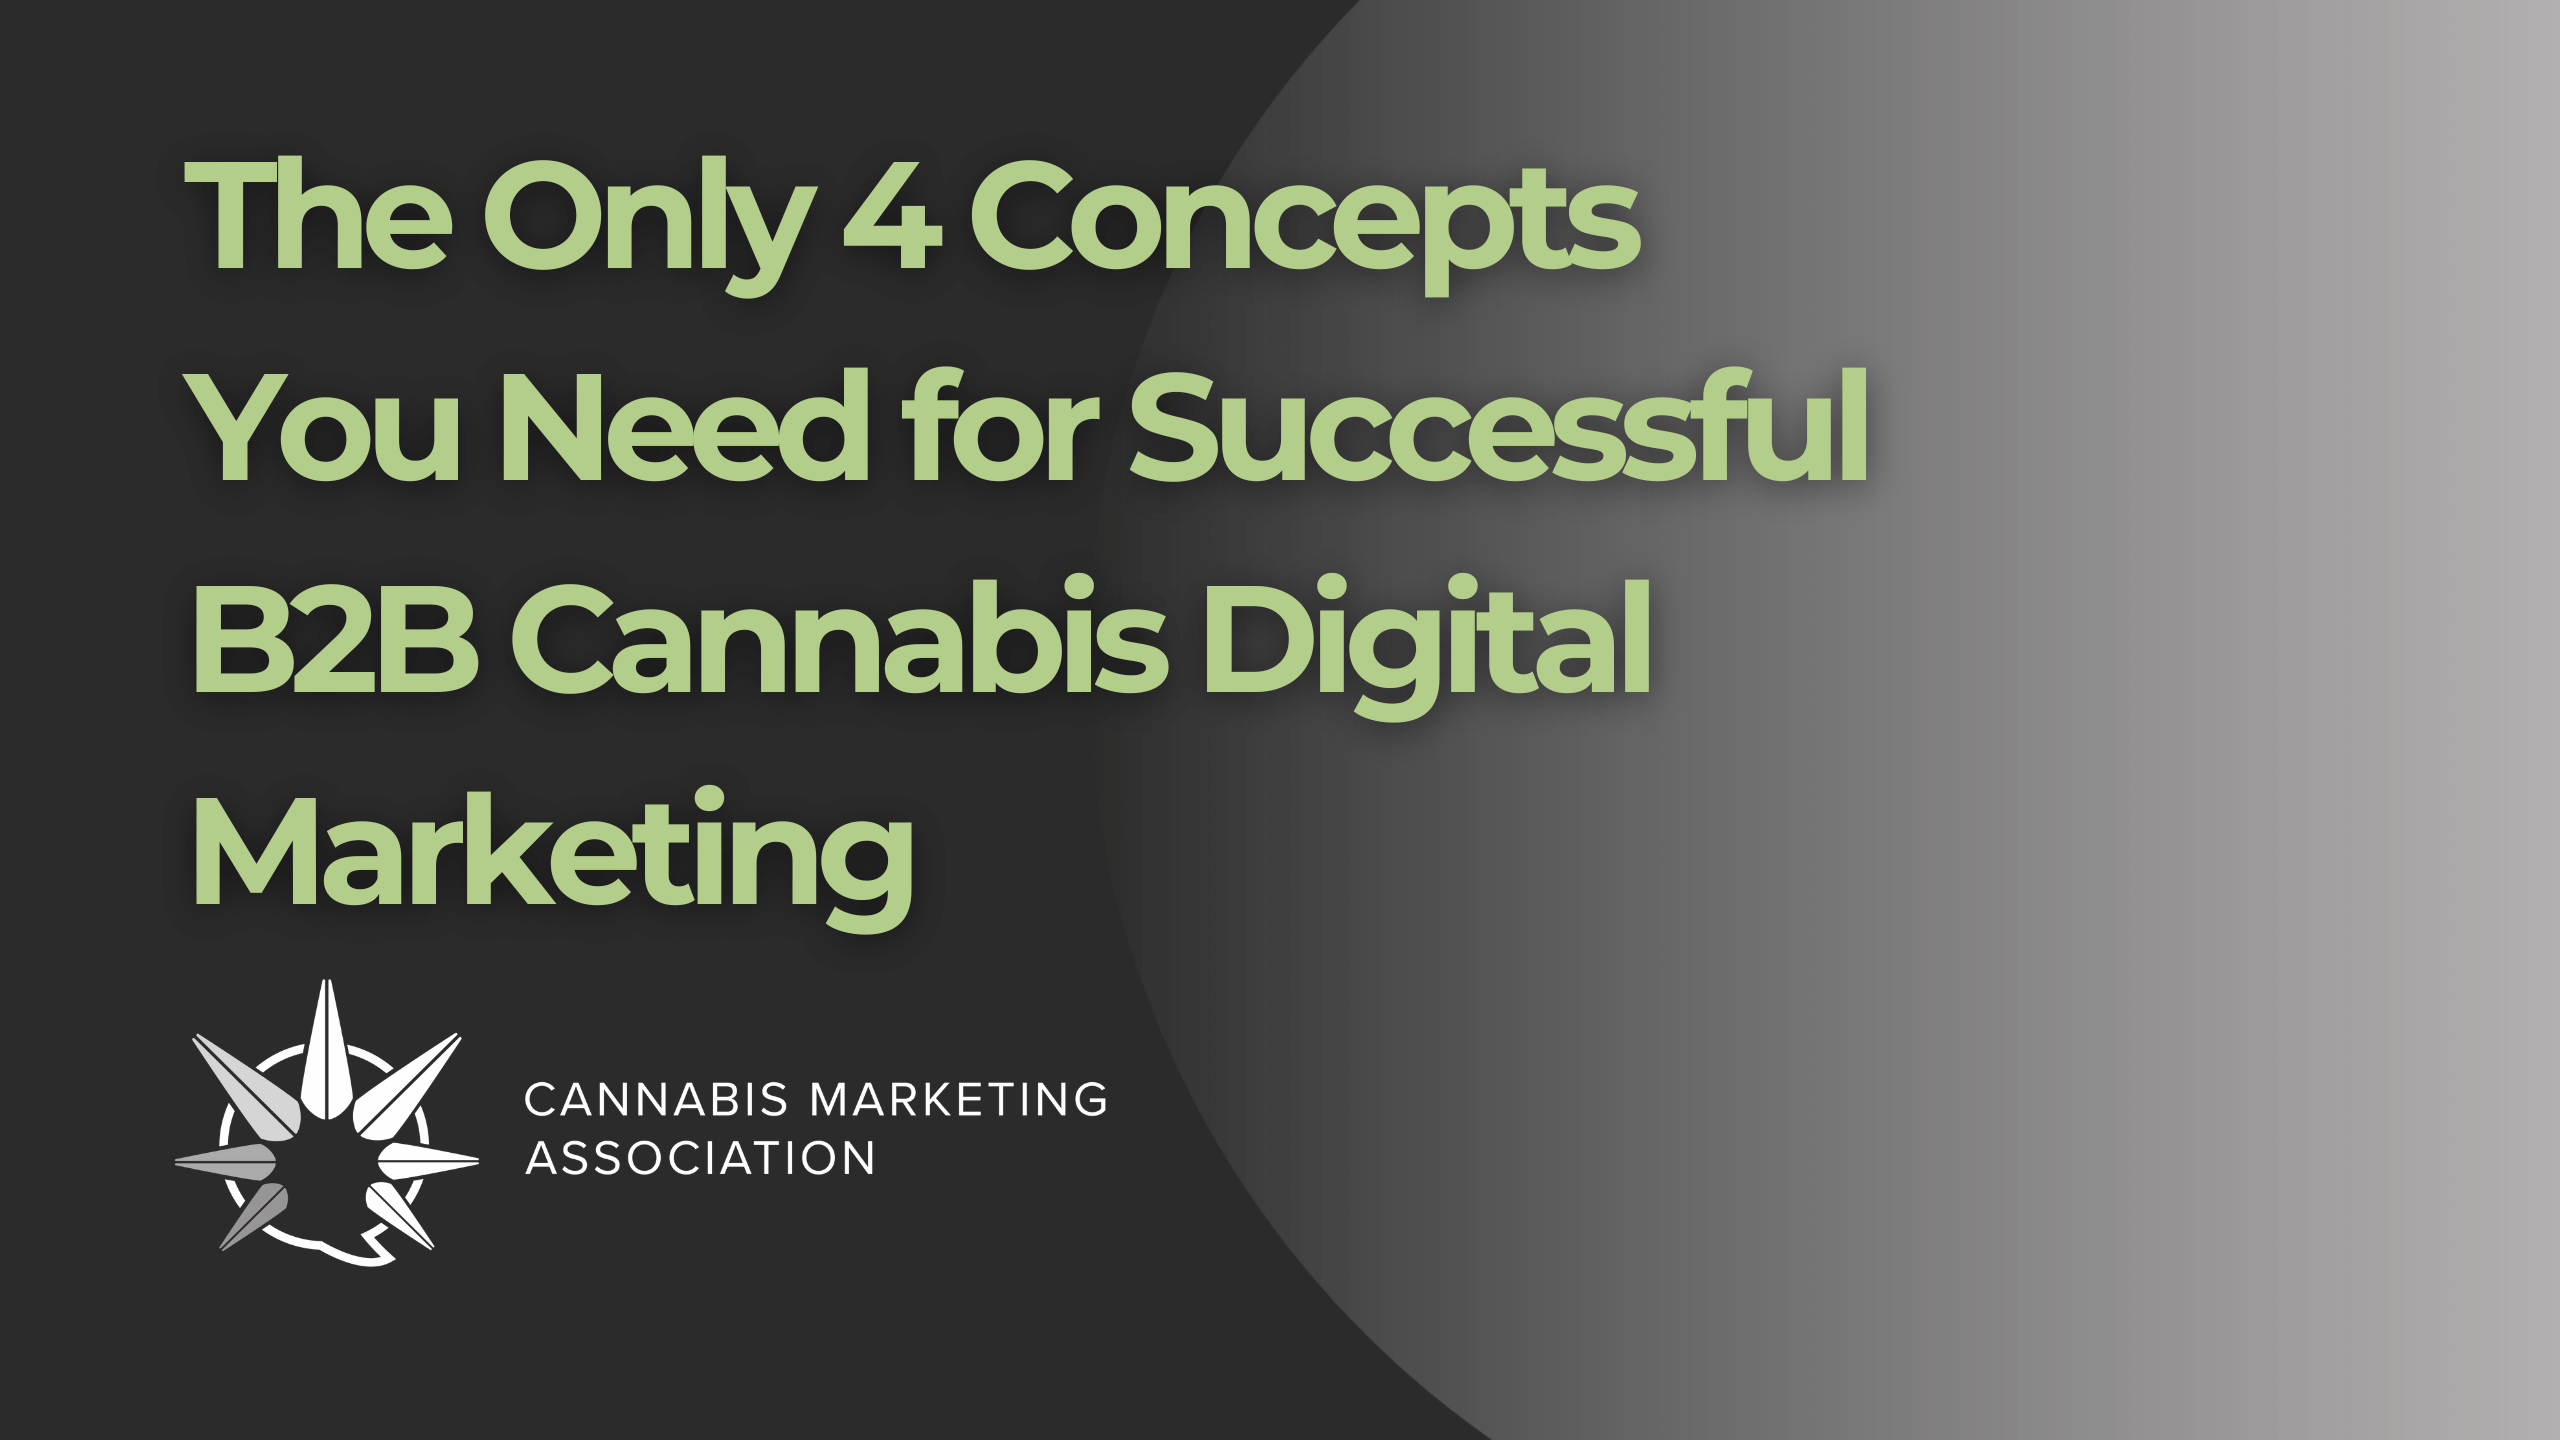 The Only 4 Concepts You Need for Successful B2B Cannabis Digital Marketing